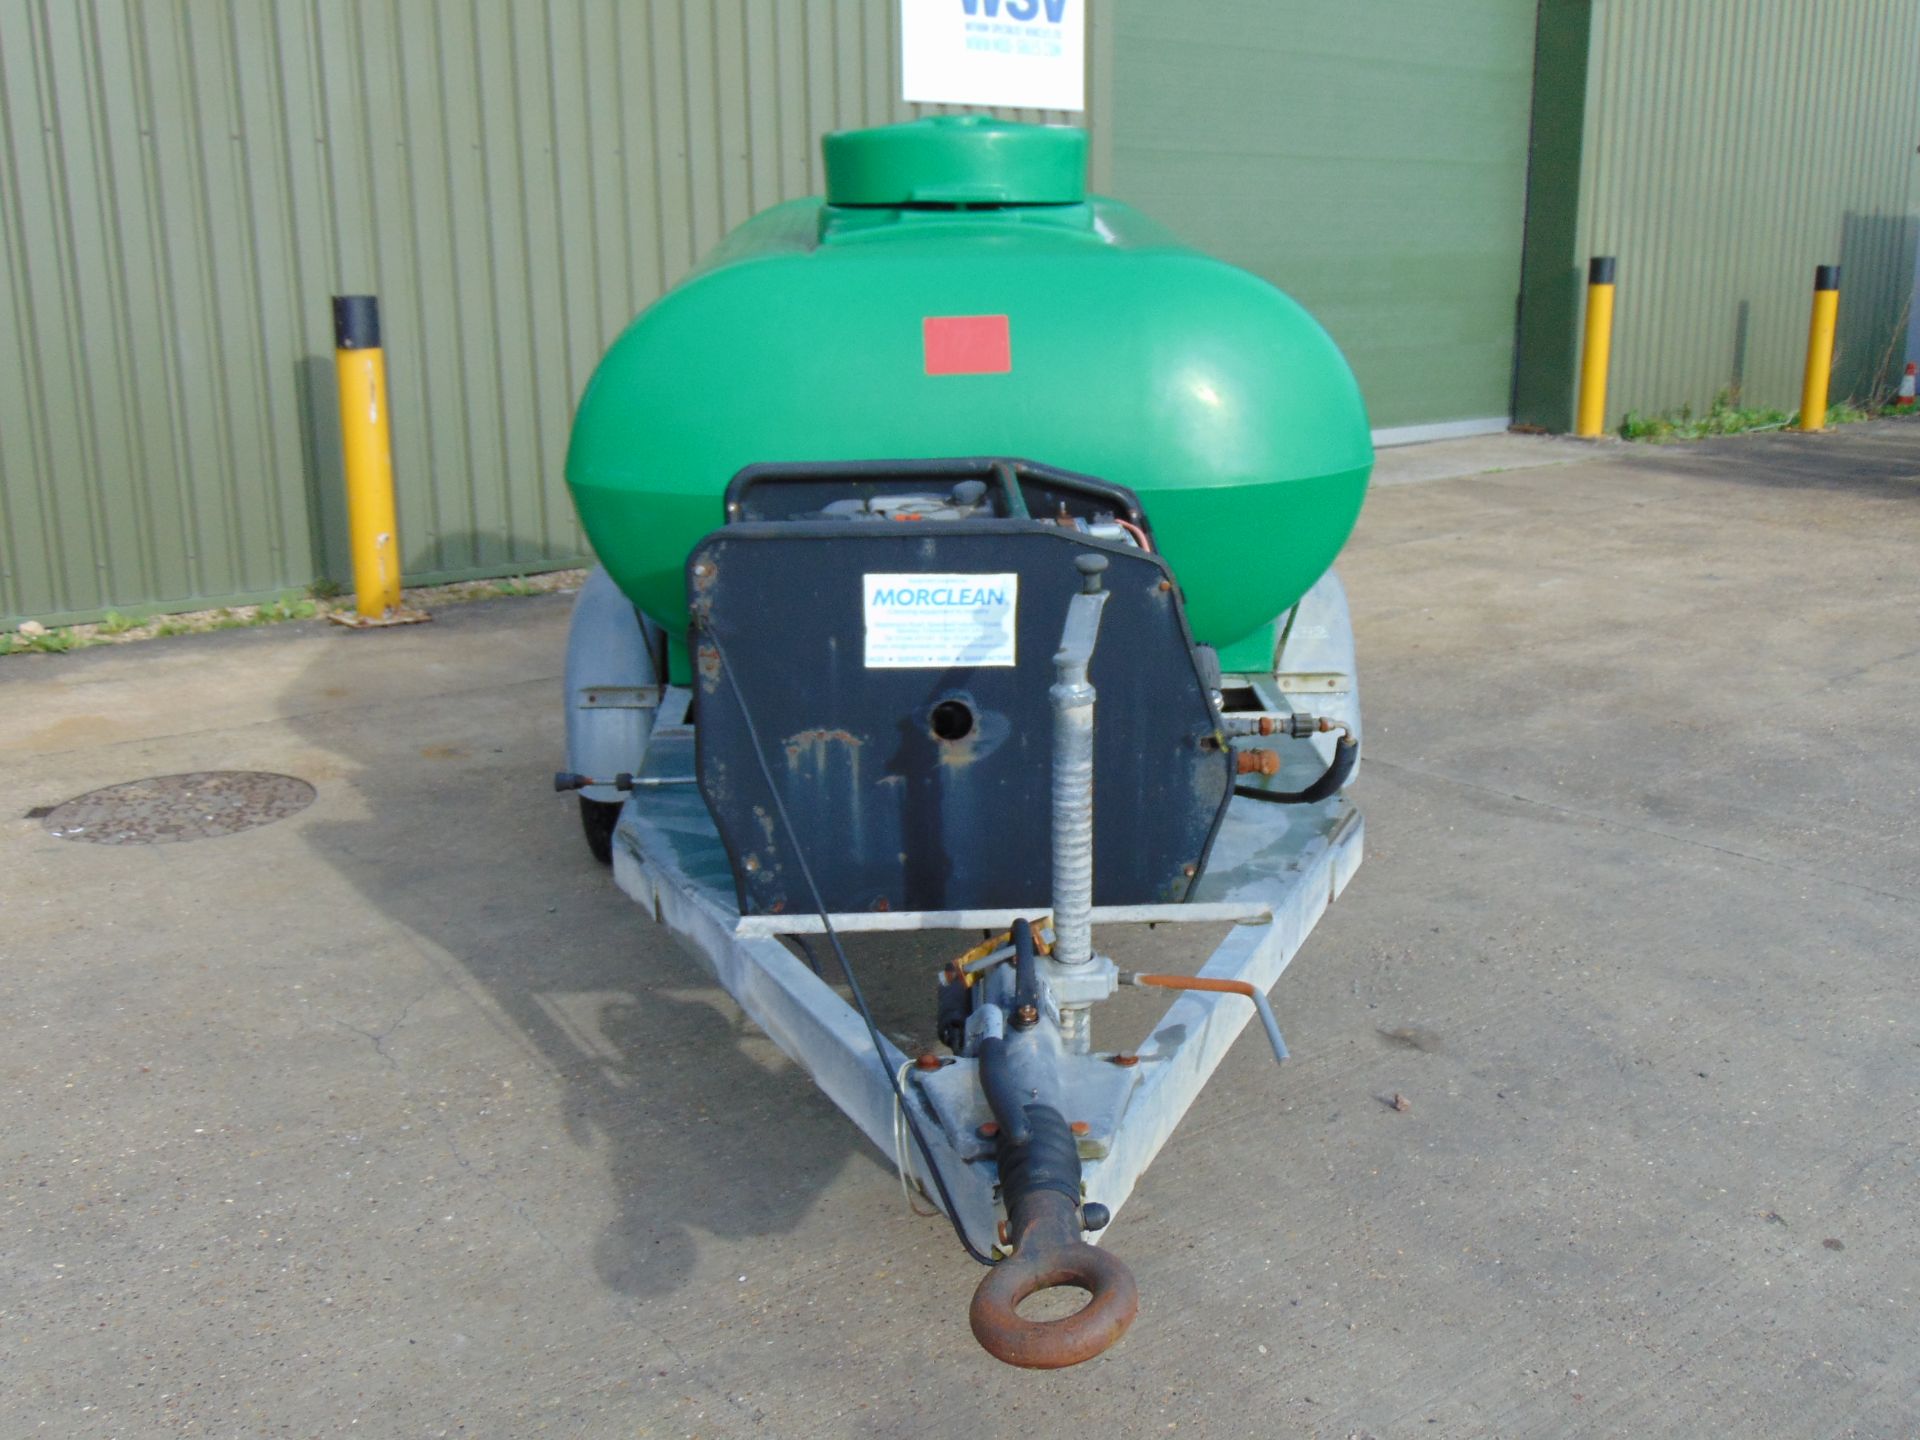 Morclean Trailer Mounted Pressure Washer with 2250 litre Water Tank and Yanmar Diesel Engine - Image 8 of 19